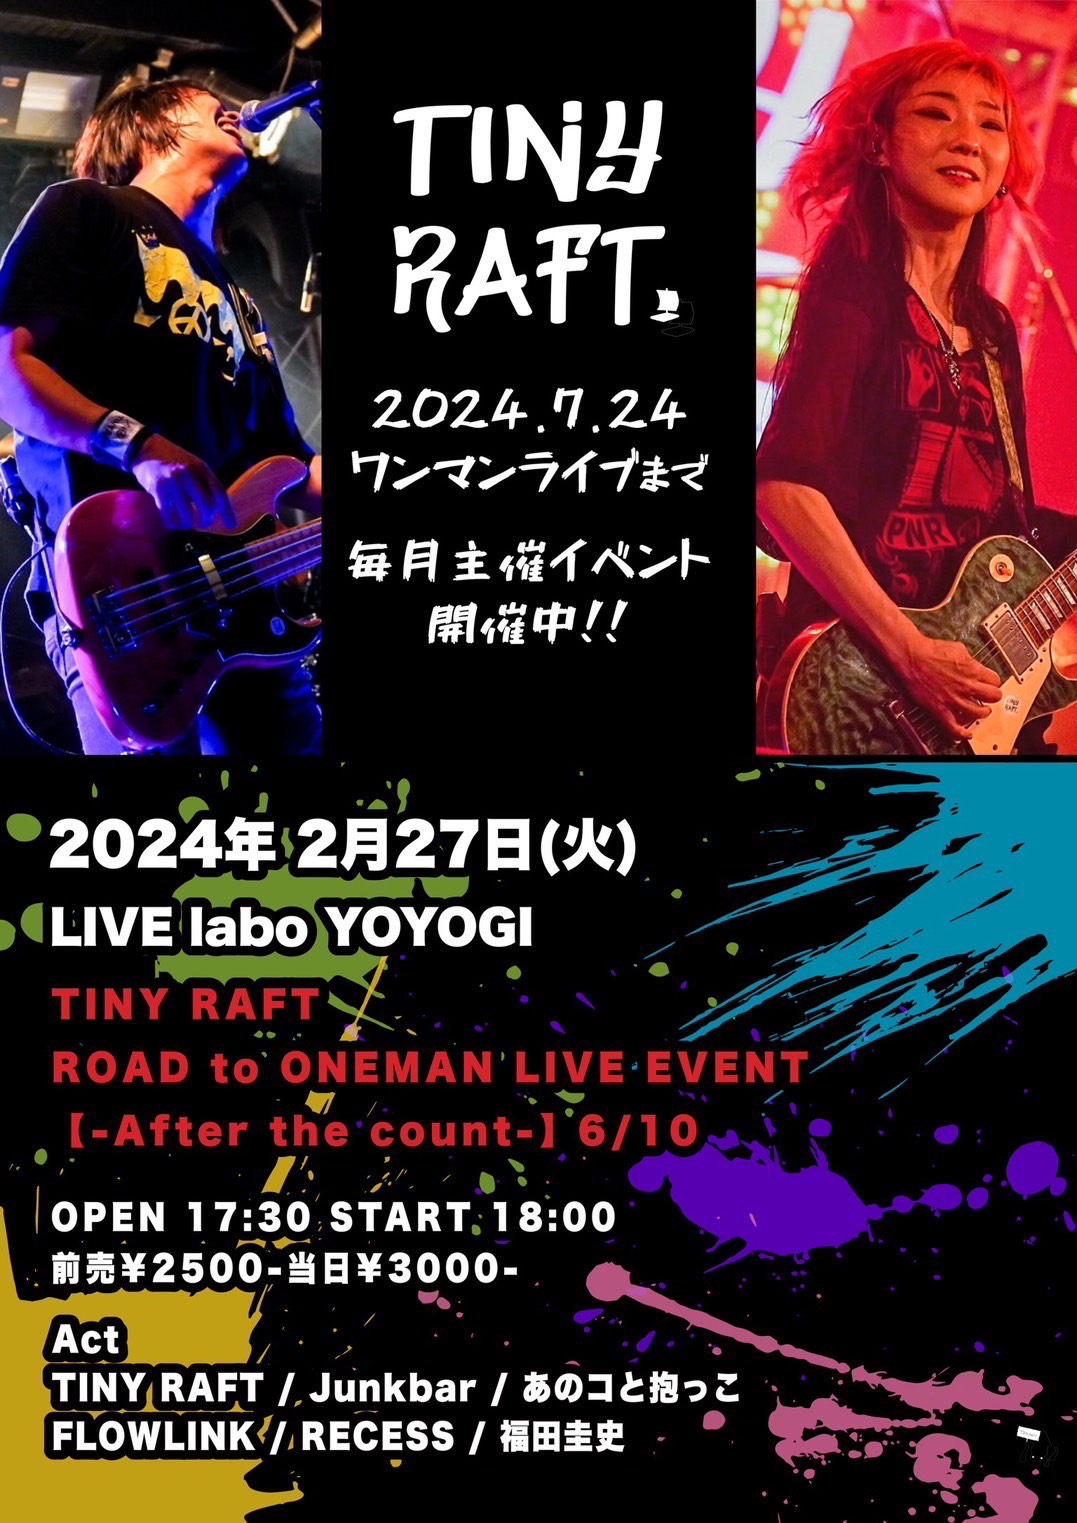 TINY RAFT ROAD TO ONEMAN LIVE EVENT
【After the count】6/10